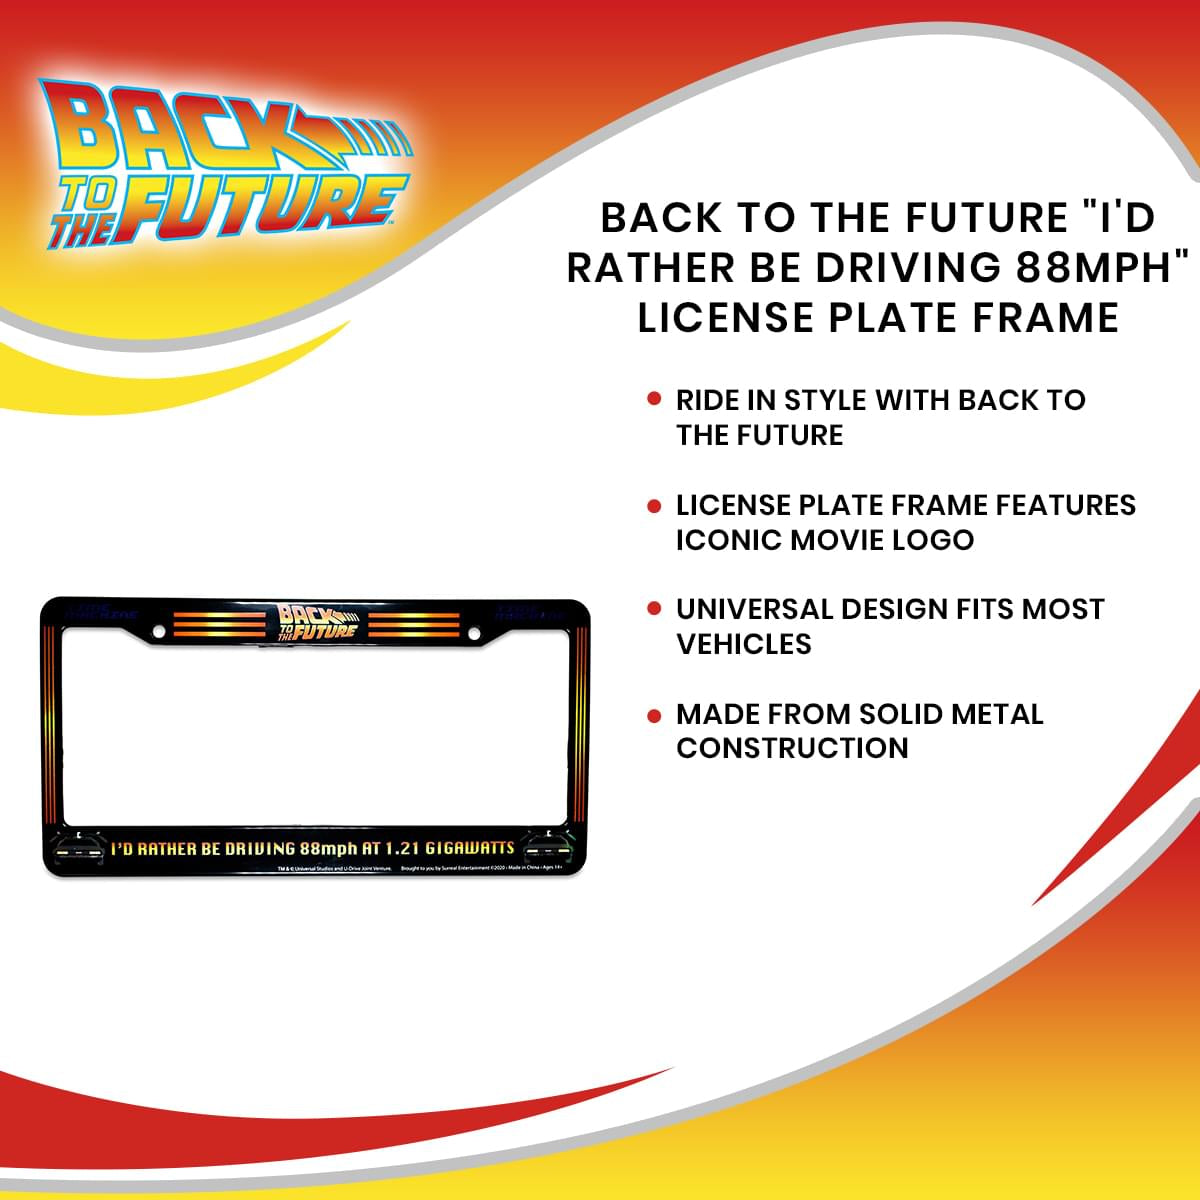 Back To The Future "I'd Rather Be Driving 88mph" License Plate Frame